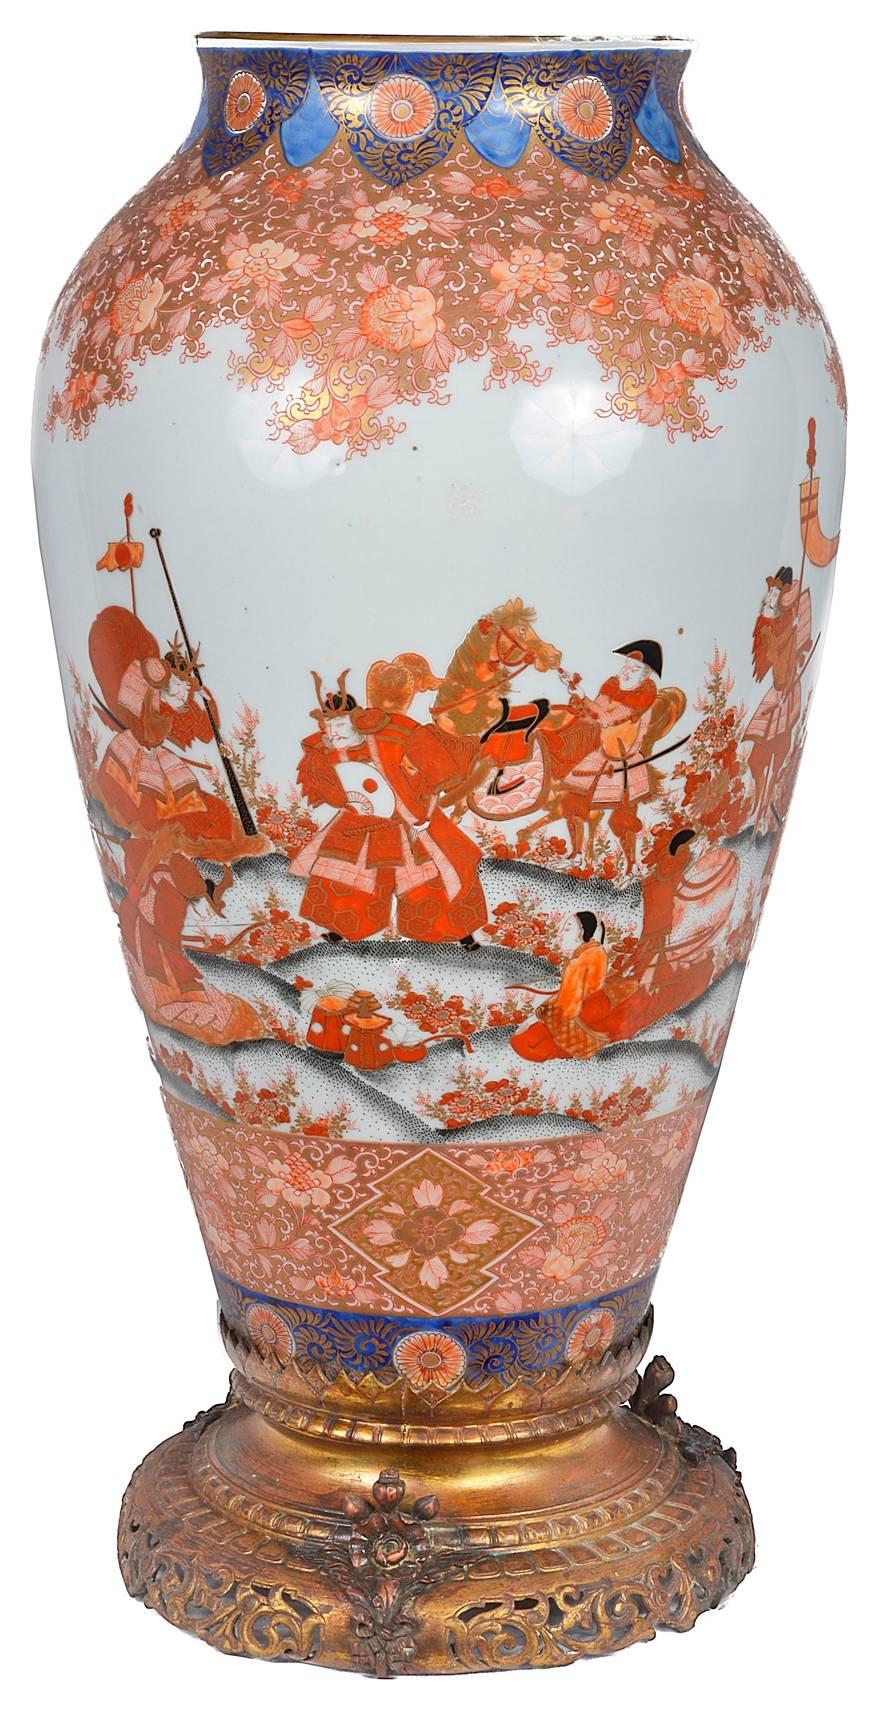 A very good quality, 19th century, Japanese Fukagawa porcelain vase or lamp. Having wonderful hand-painted scenes of Samurai warriors, some on horseback going to battle. Mounted on a gilded ormolu base.
Wiring can be arranged.
 